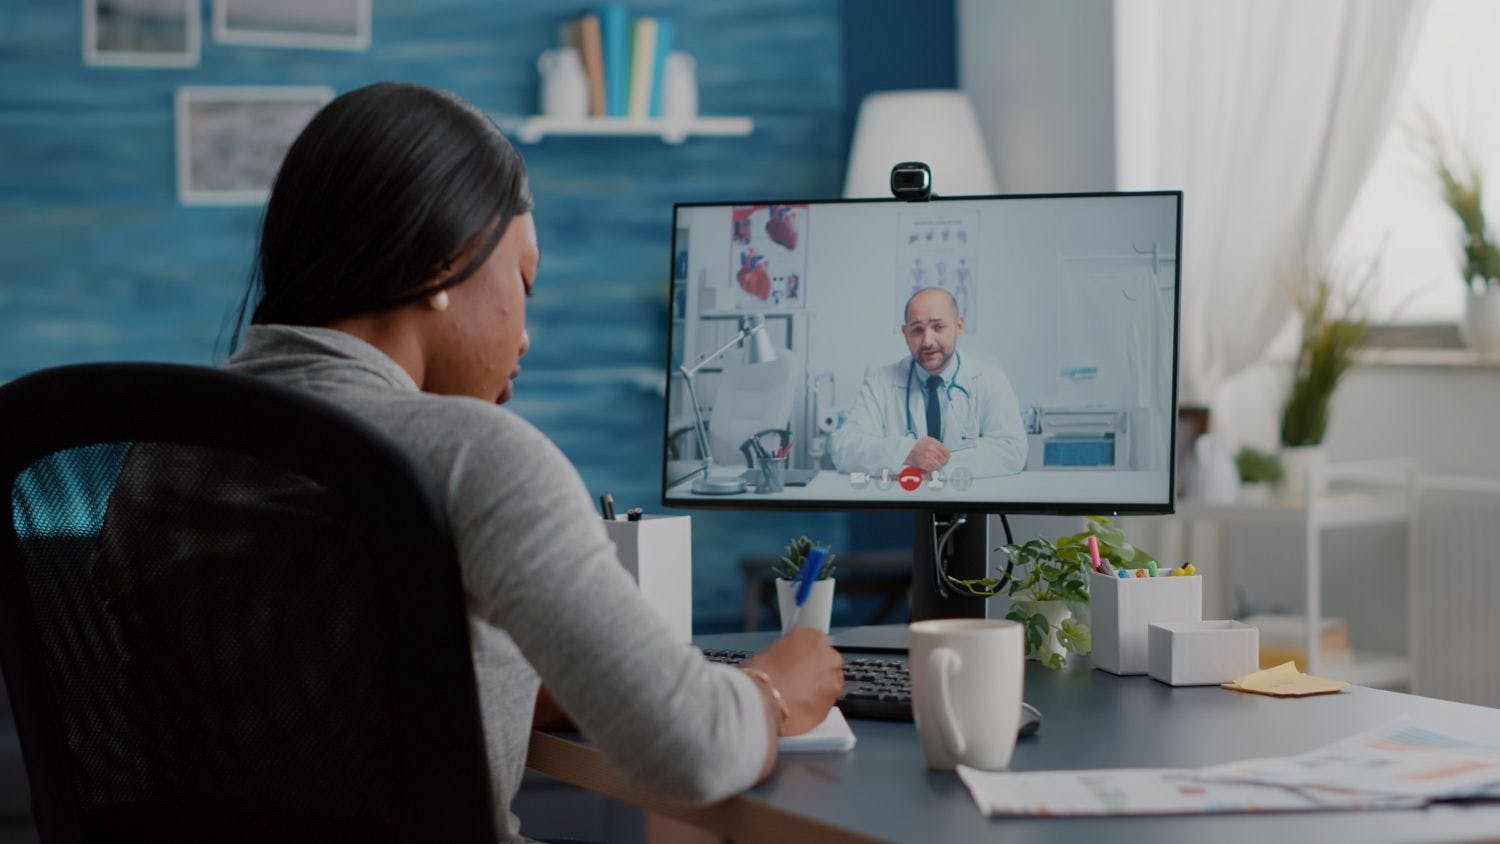 Get Urgent Medical Care 24/7 with Virtual Telehealth Services